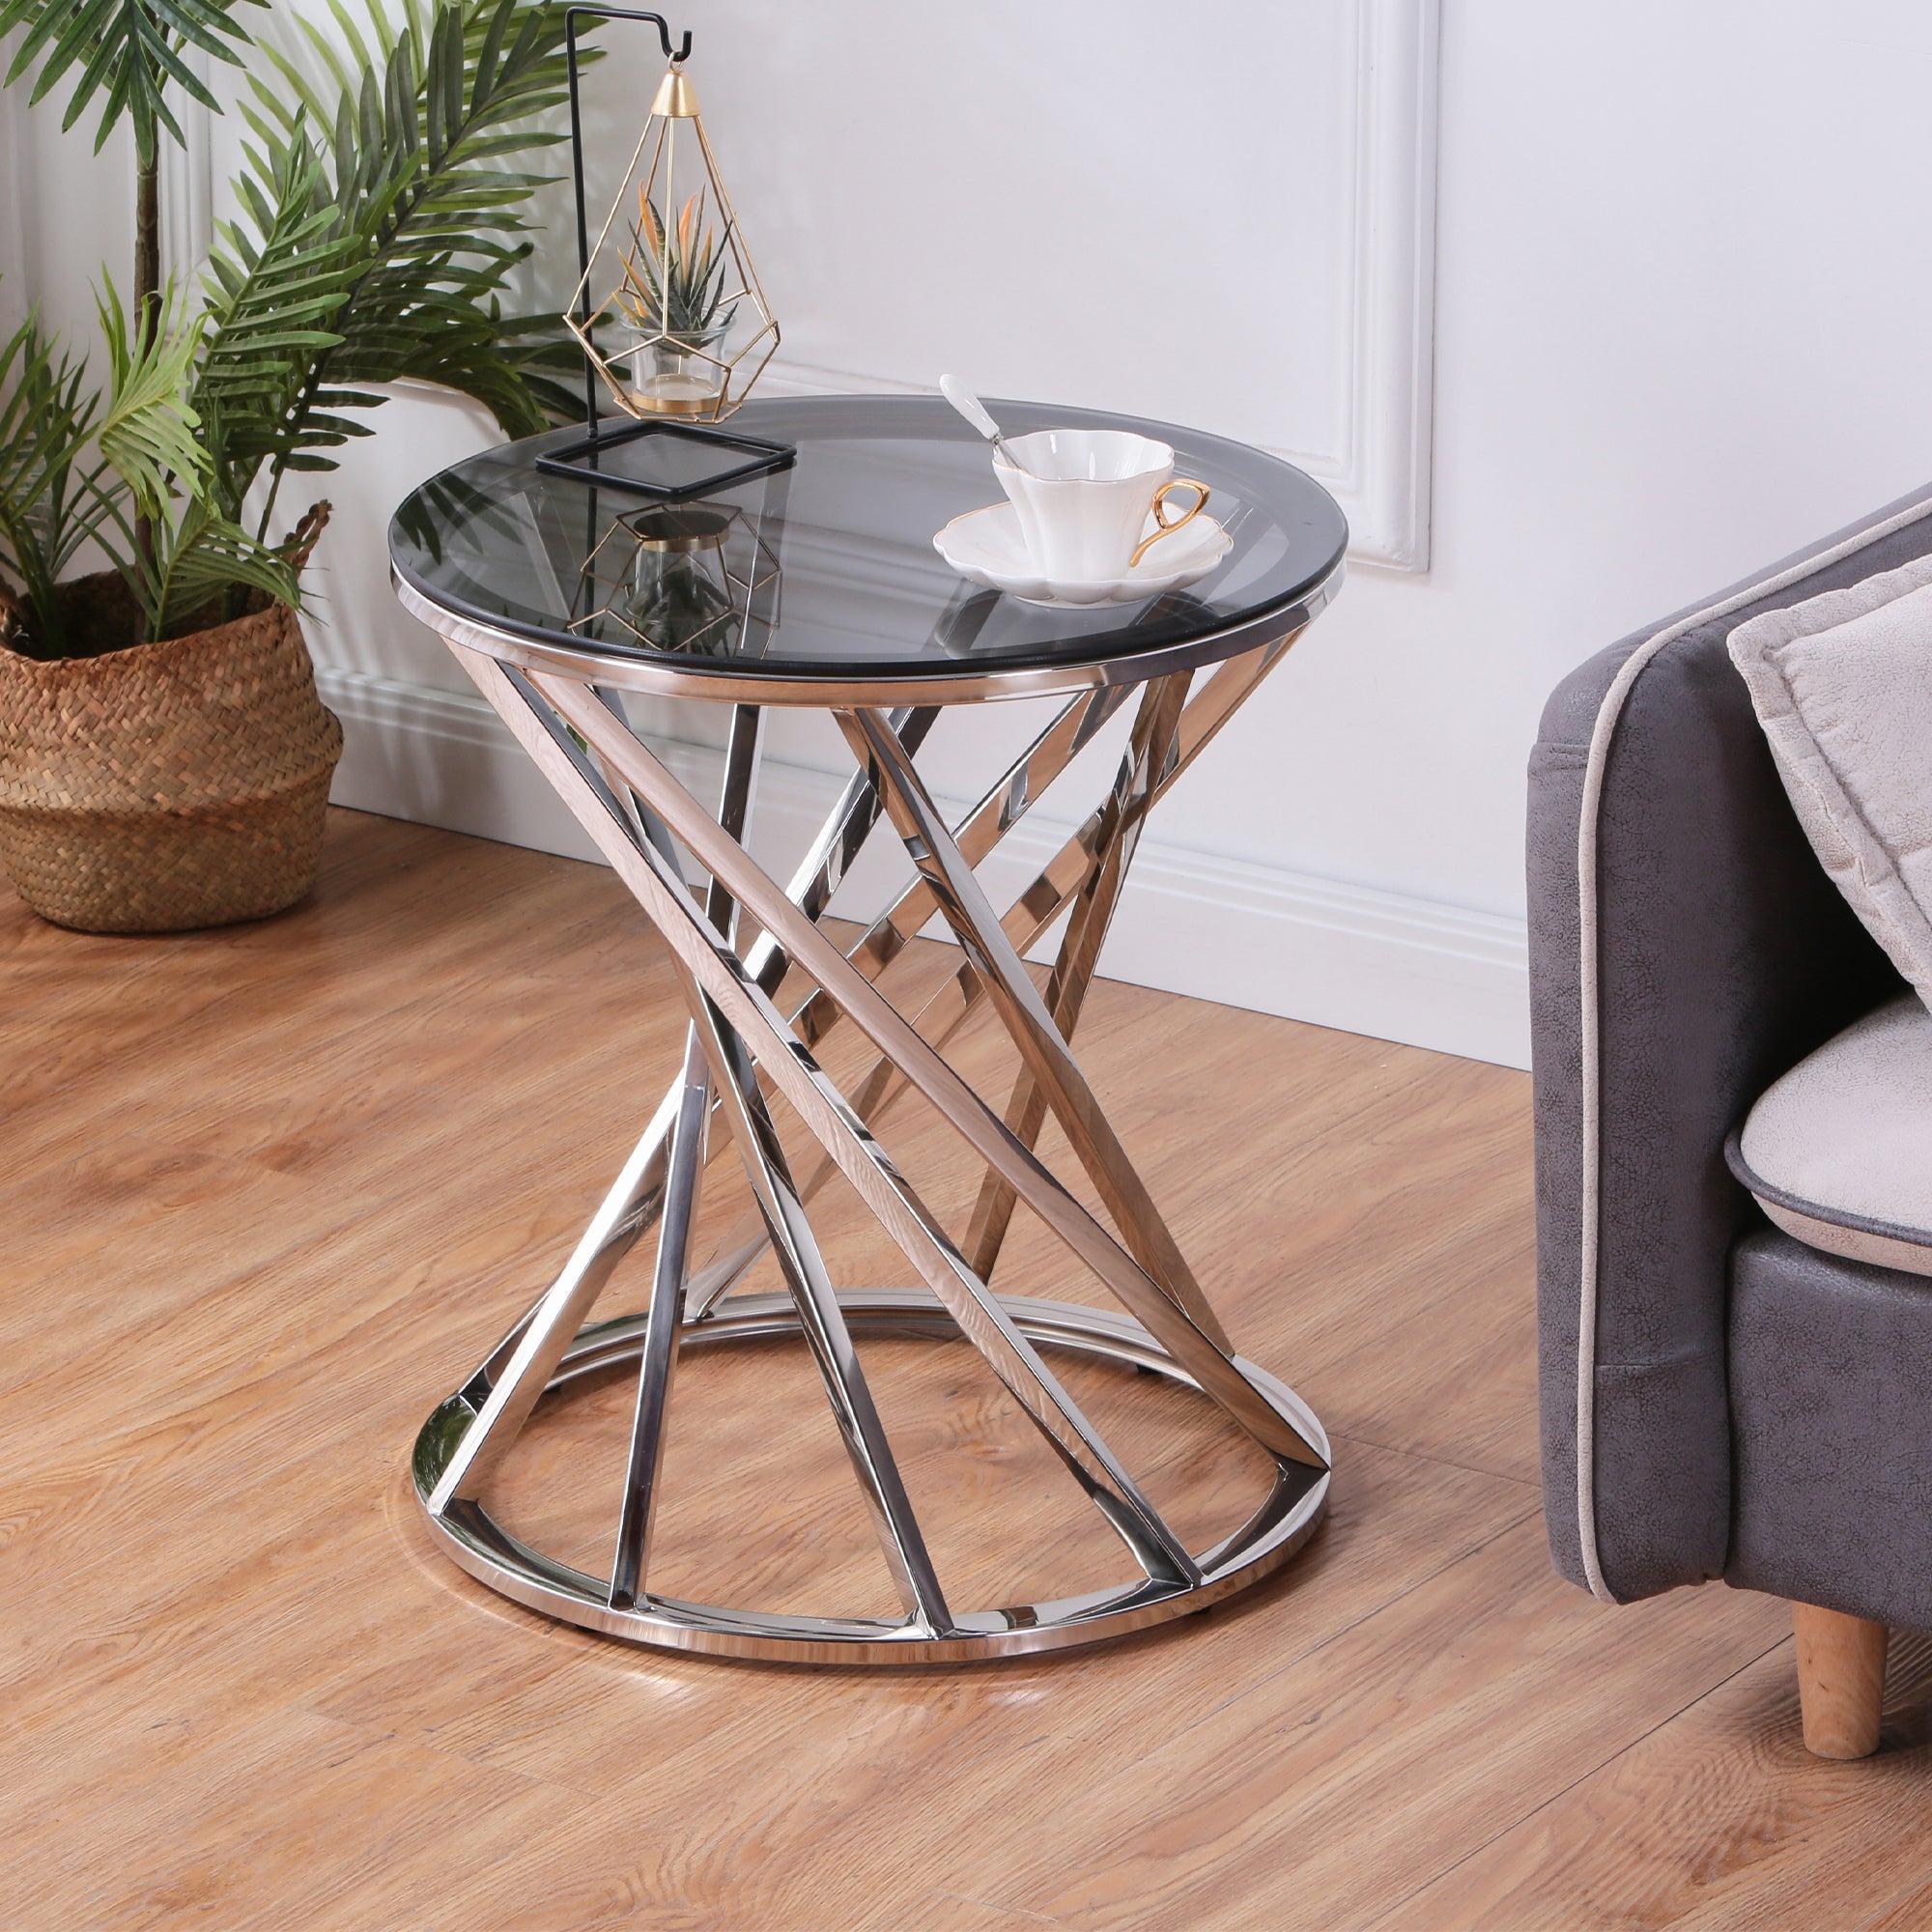 Set of 1 Round Glass Top Side Table for Living Room